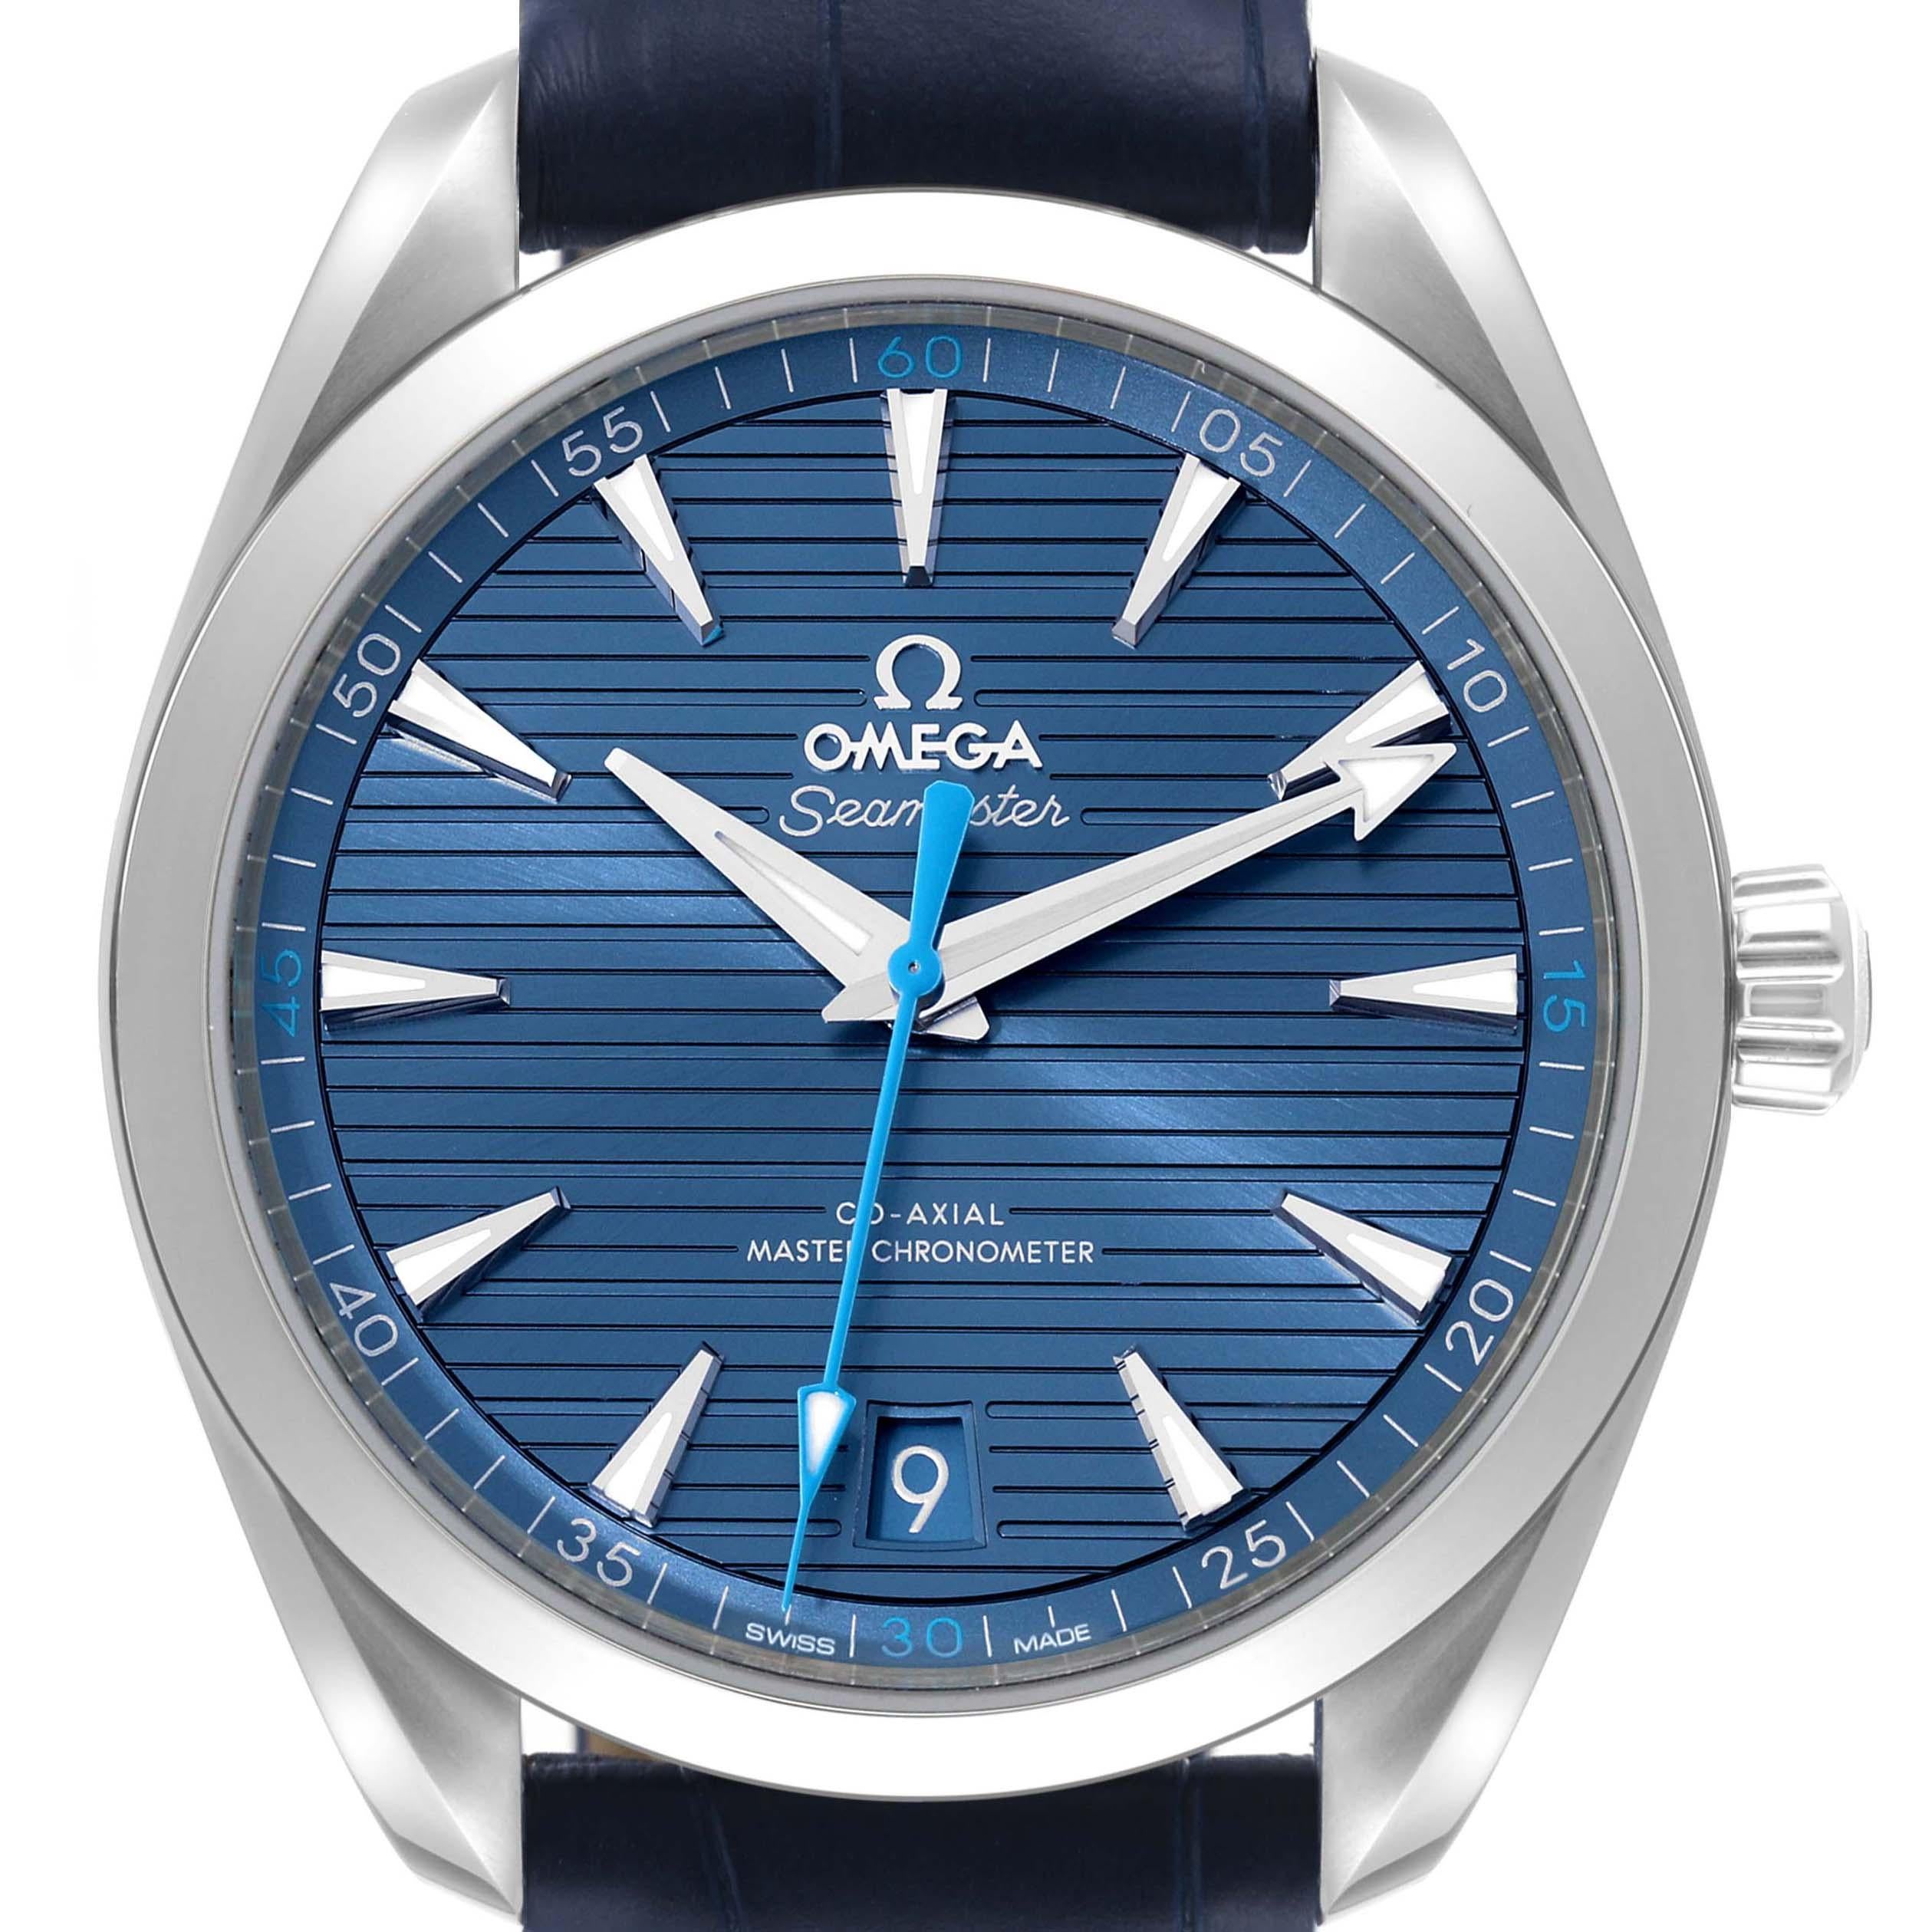 Omega Seamaster Aqua Terra Blue Dial Mens Watch 220.13.41.21.03.002 Unworn. Automatic self-winding movement. Stainless steel round case 41.0 mm in diameter. Case thickness 13.2 mm. Exhibition transparent sapphire crystal caseback. Stainless steel